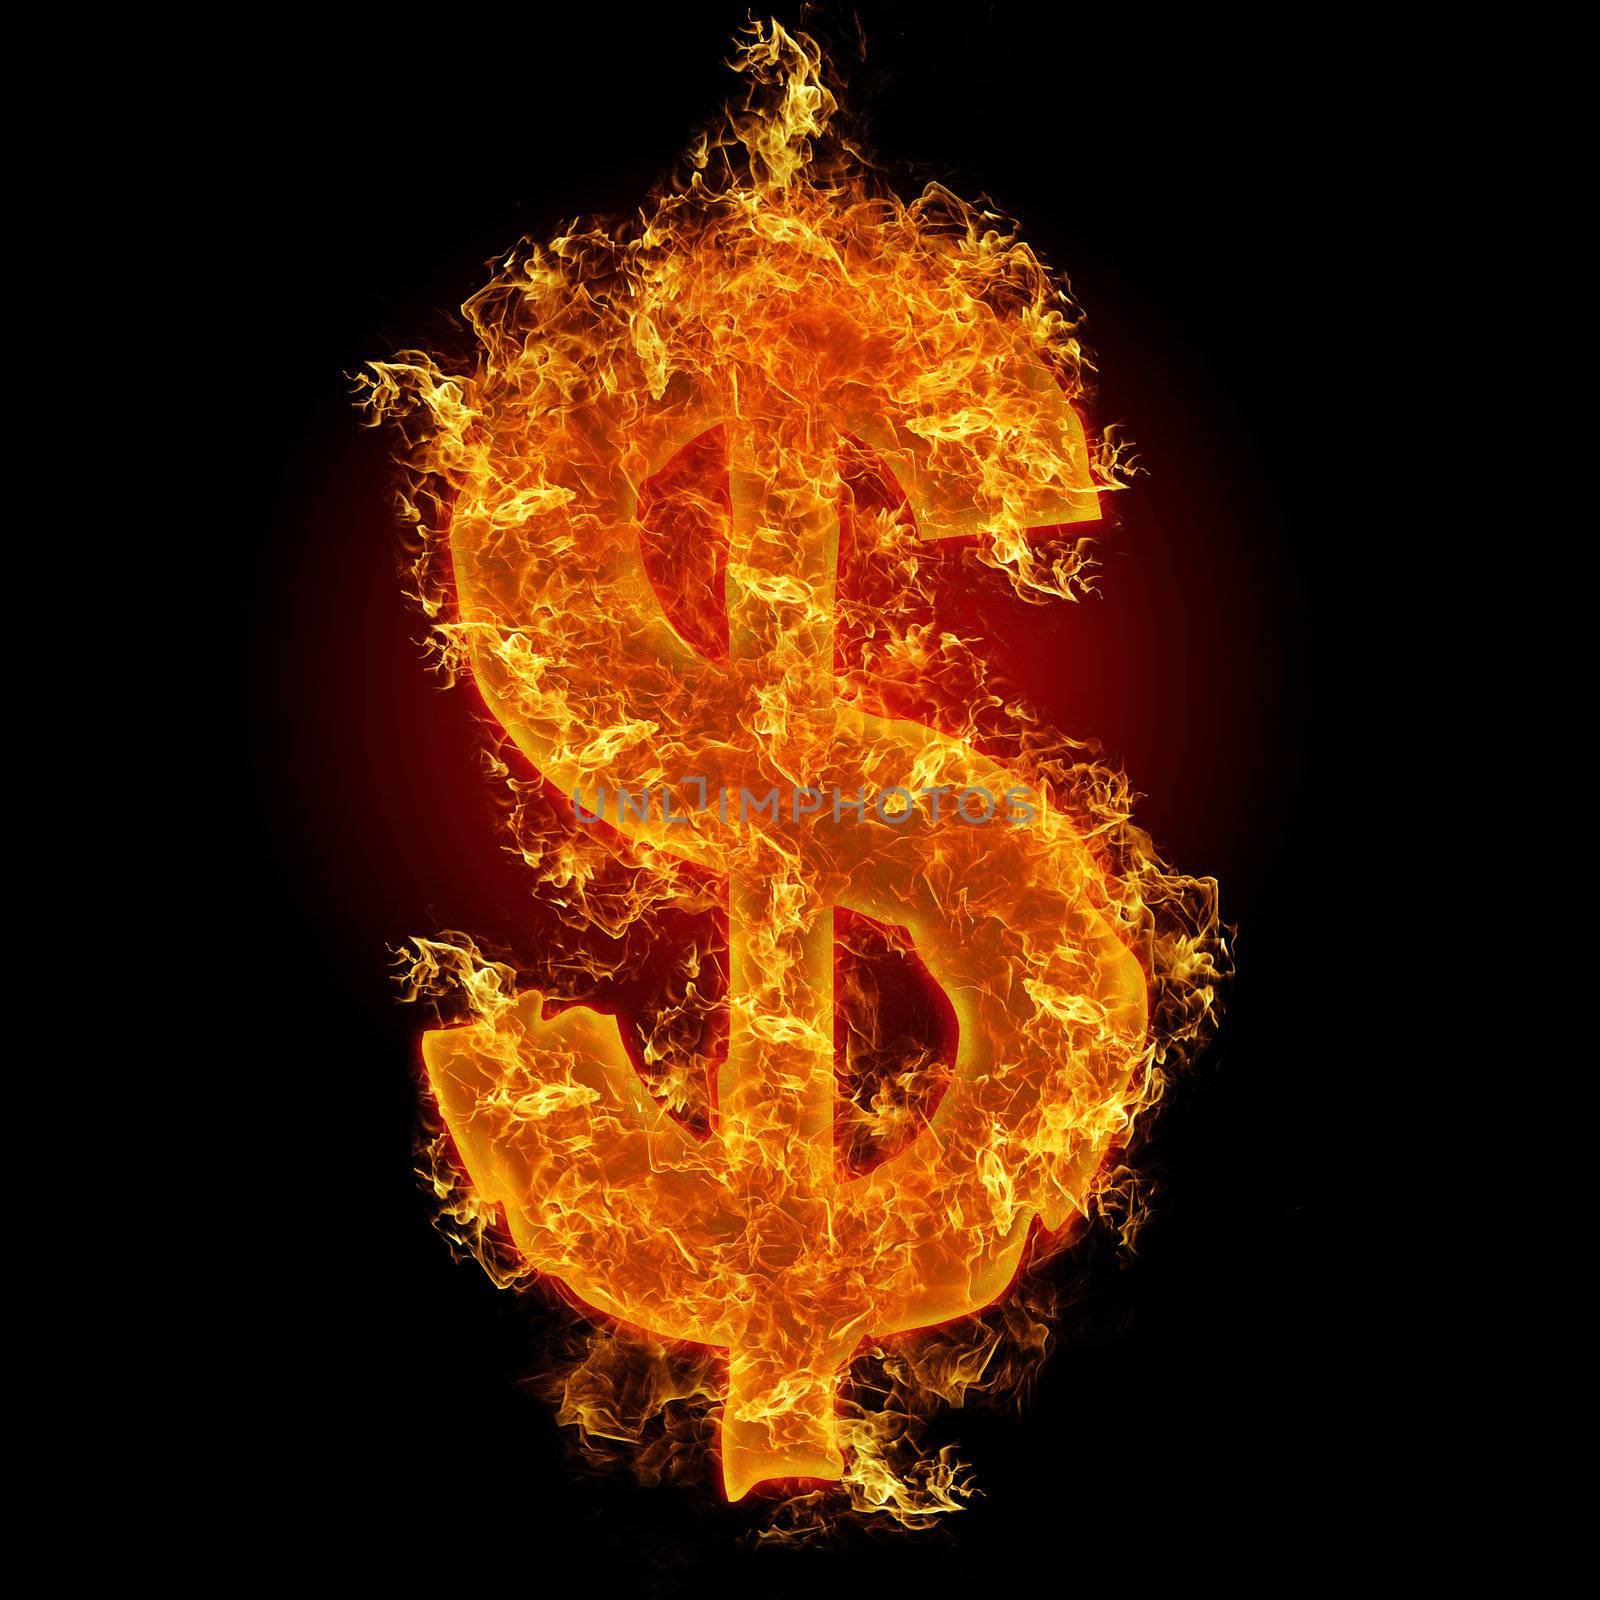 Fire dollar sign on a black background